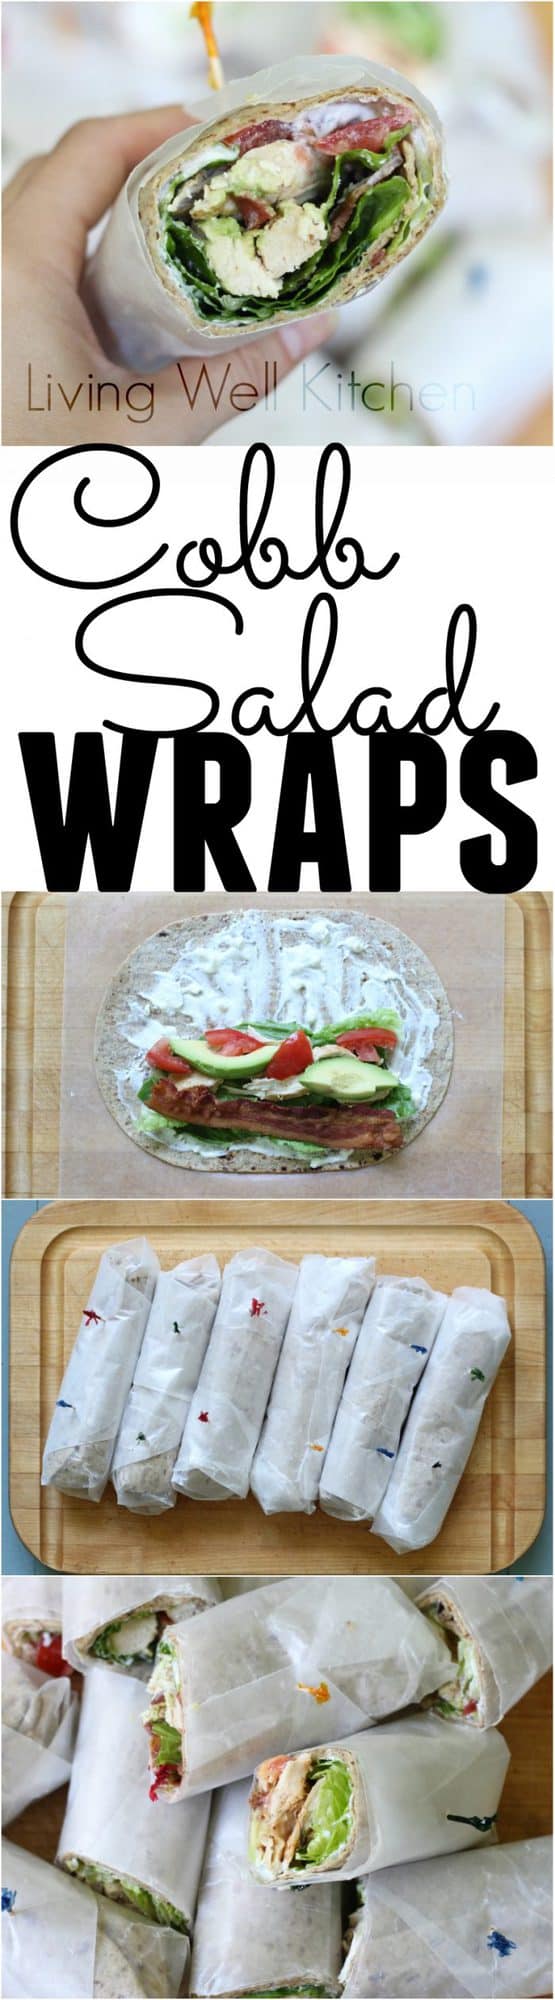 Cobb Salad Wraps from @memeinge have all the goodies of a Cobb Salad but are neatly wrapped for portability and easy eating. These are great for a make-ahead, filling & tasty lunch.